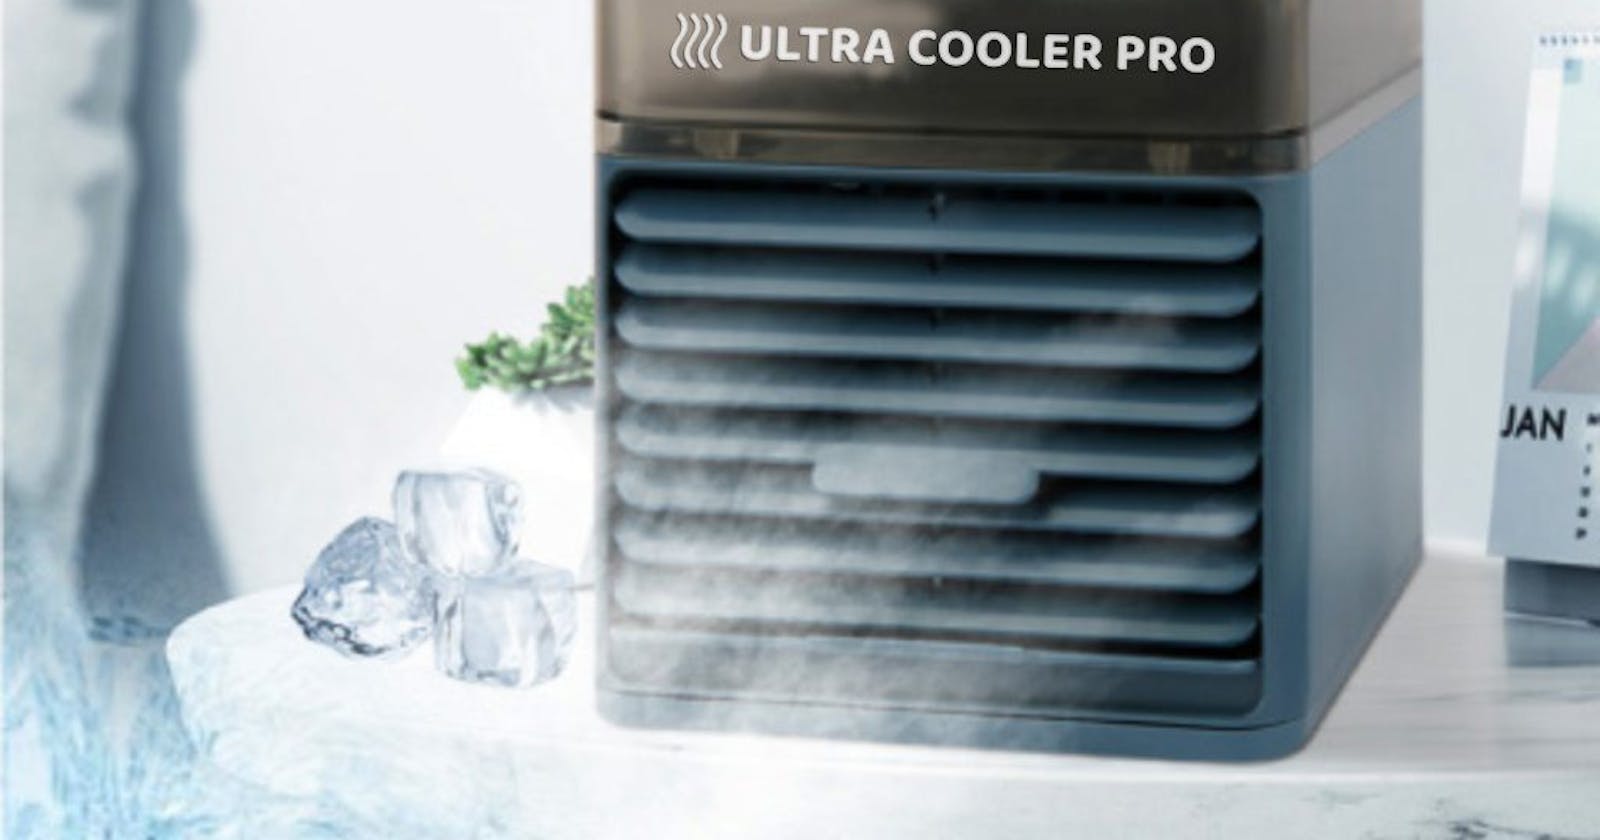 Ultra Cooler Pro Review - Experience Unmatched Cooling Performance With The Ultra Cooler Pro!